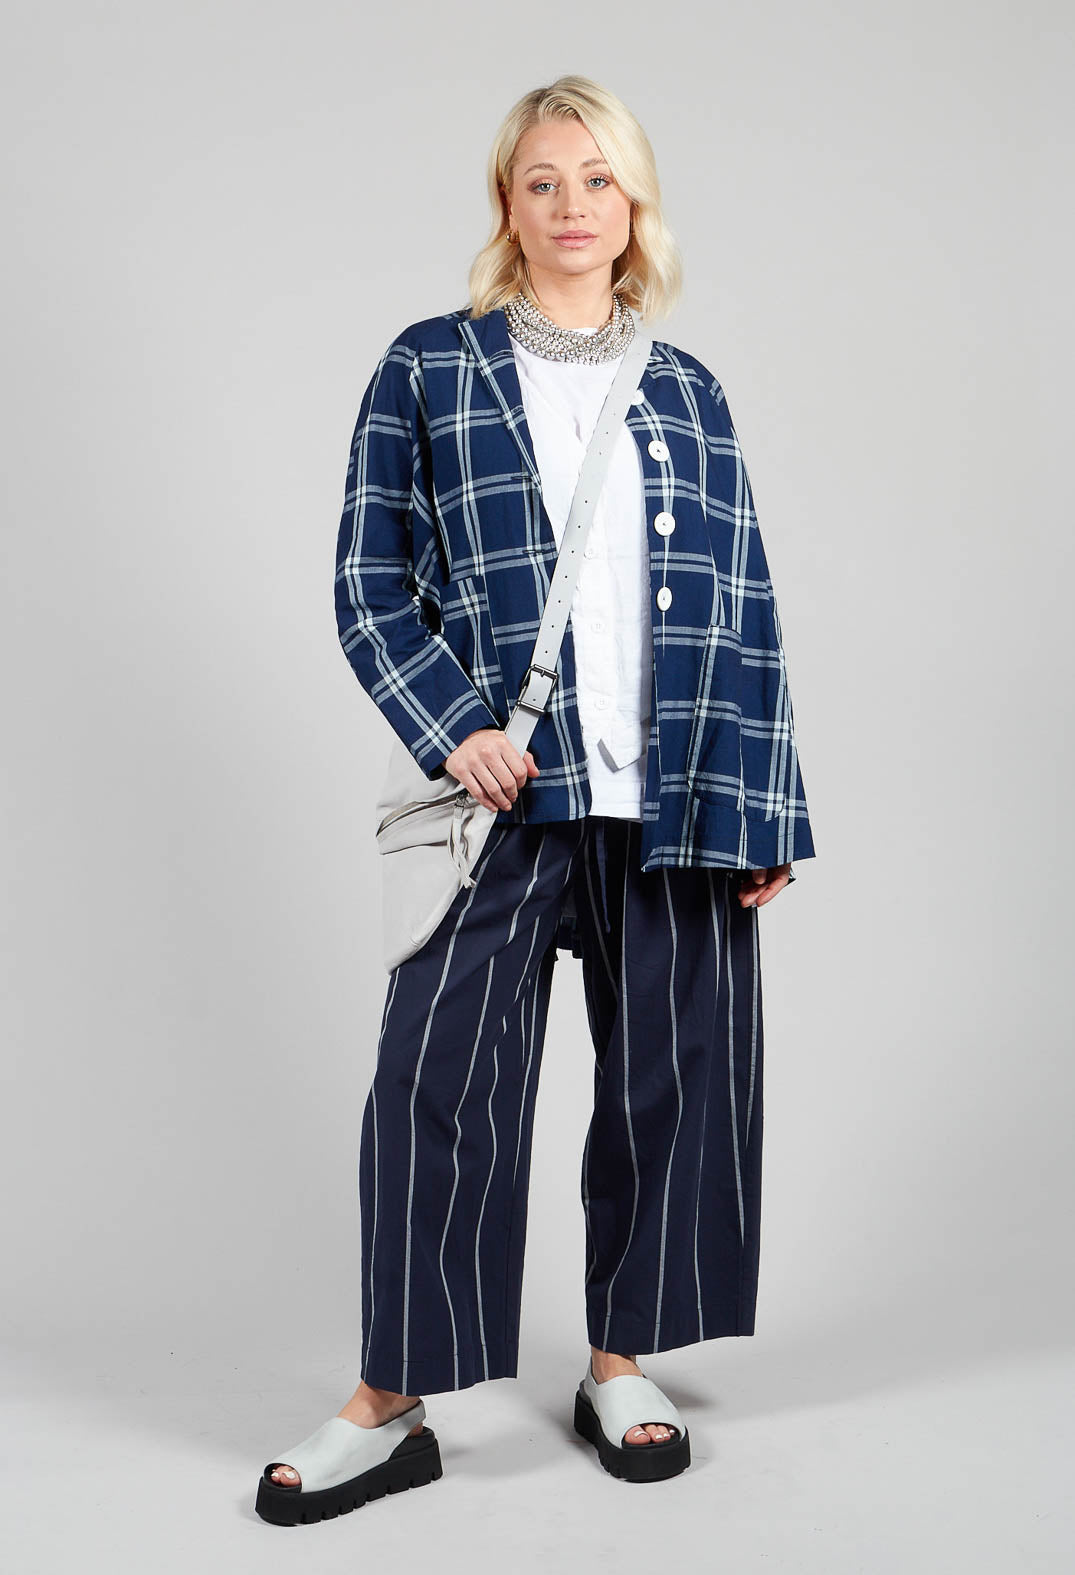 Pull String Waist Trousers in Indigo Striped